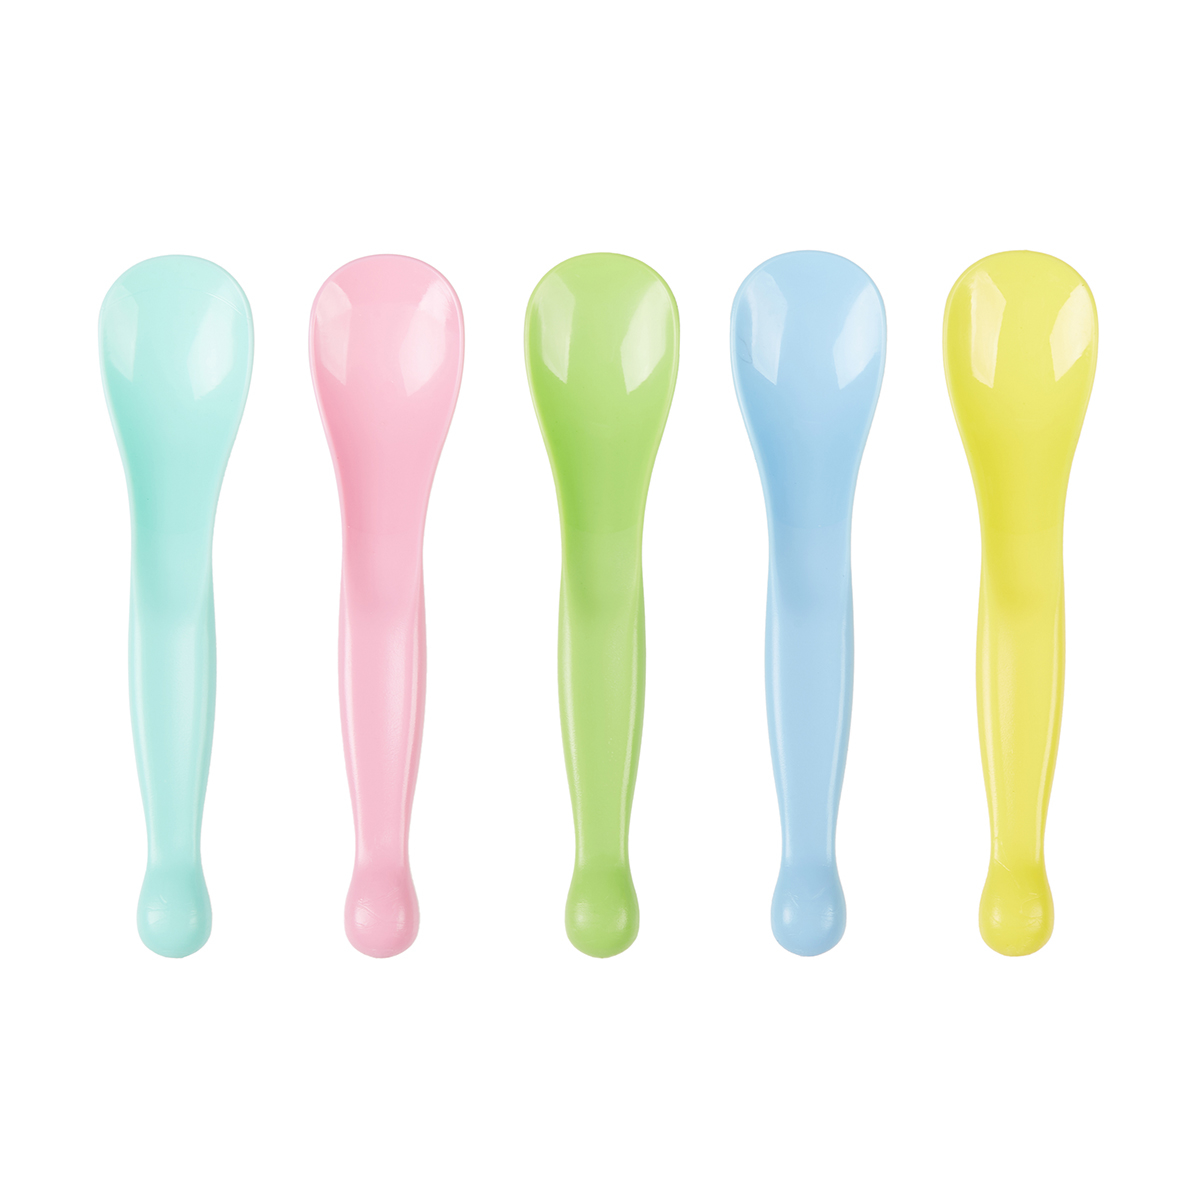 My First Spoons - Set of 5 | KmartNZ